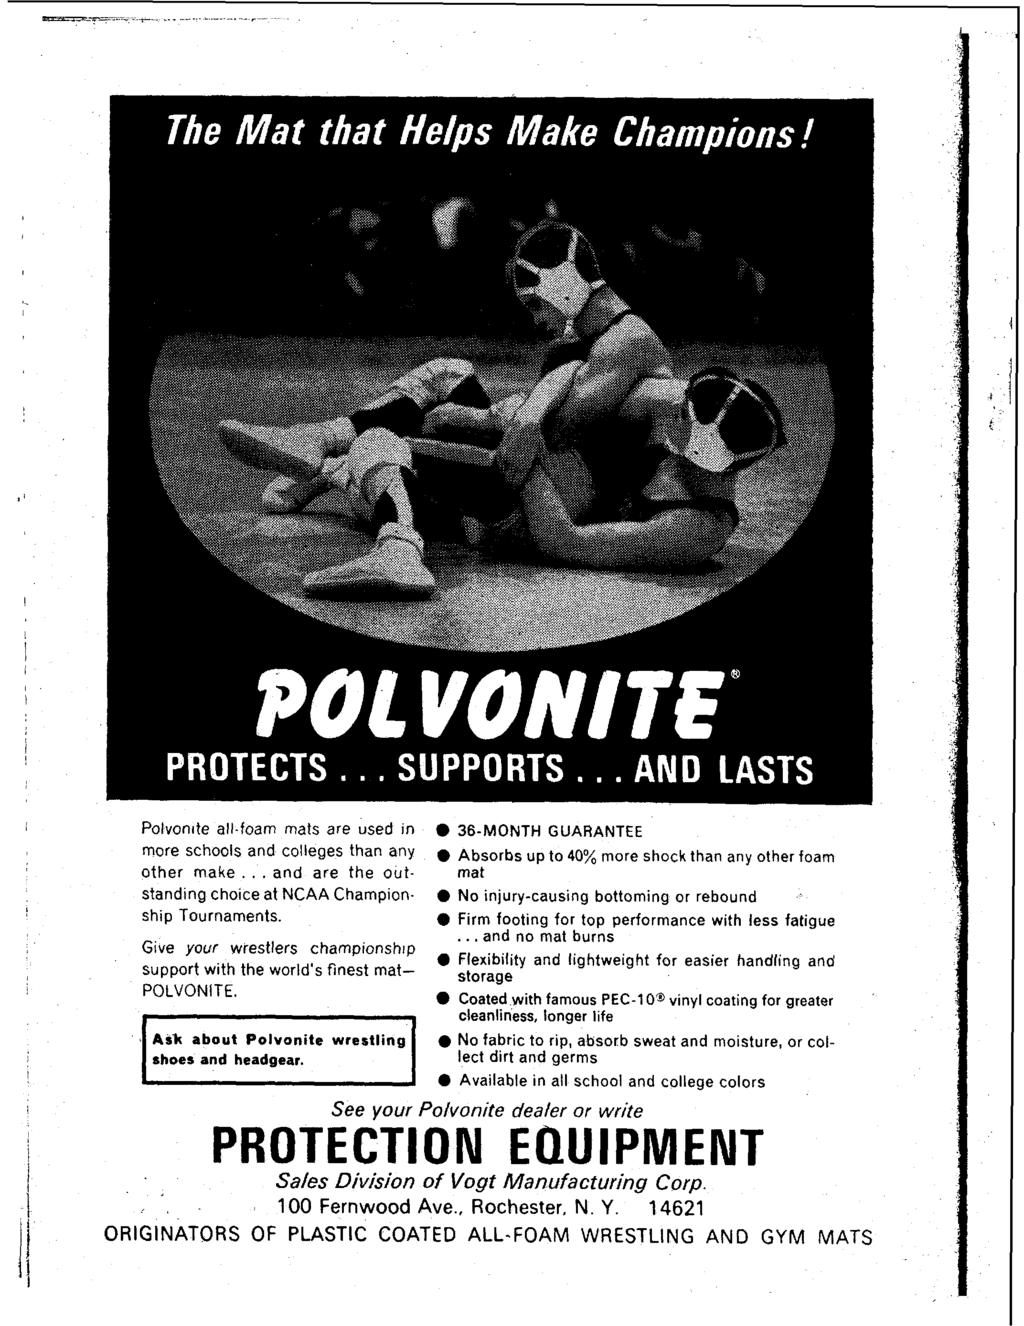 Polvon~te all.foam mats are used In more schools and colleges than any other make... and are the out- stand~ng choce at NCAA Championshlp Tournaments.